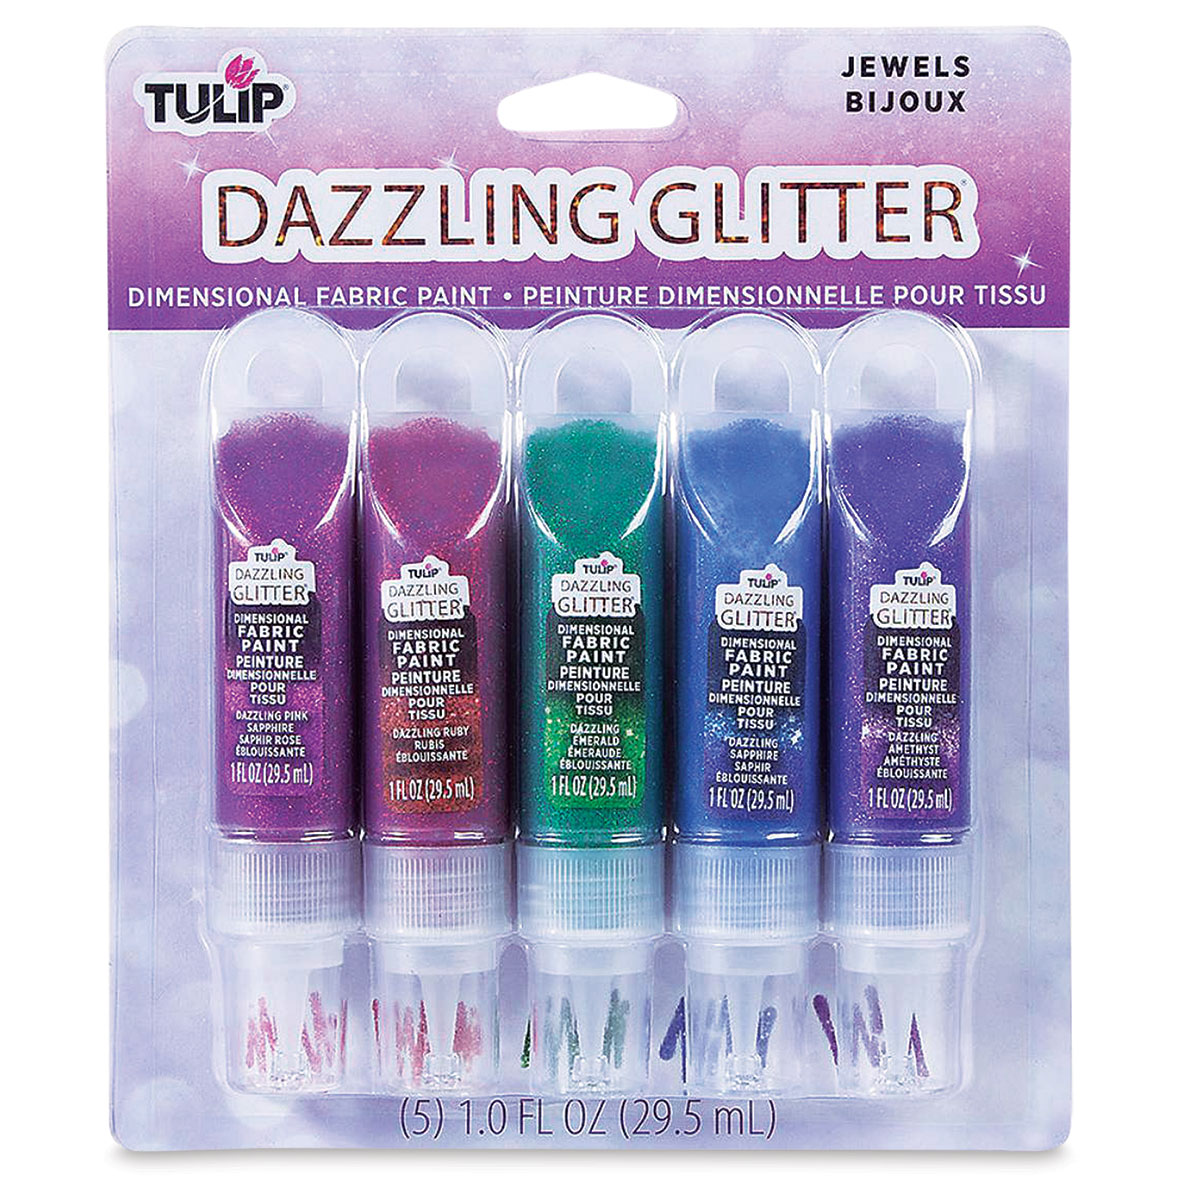 Tulip Dimensional Fabric Paint Set - Puffy, Set of 6